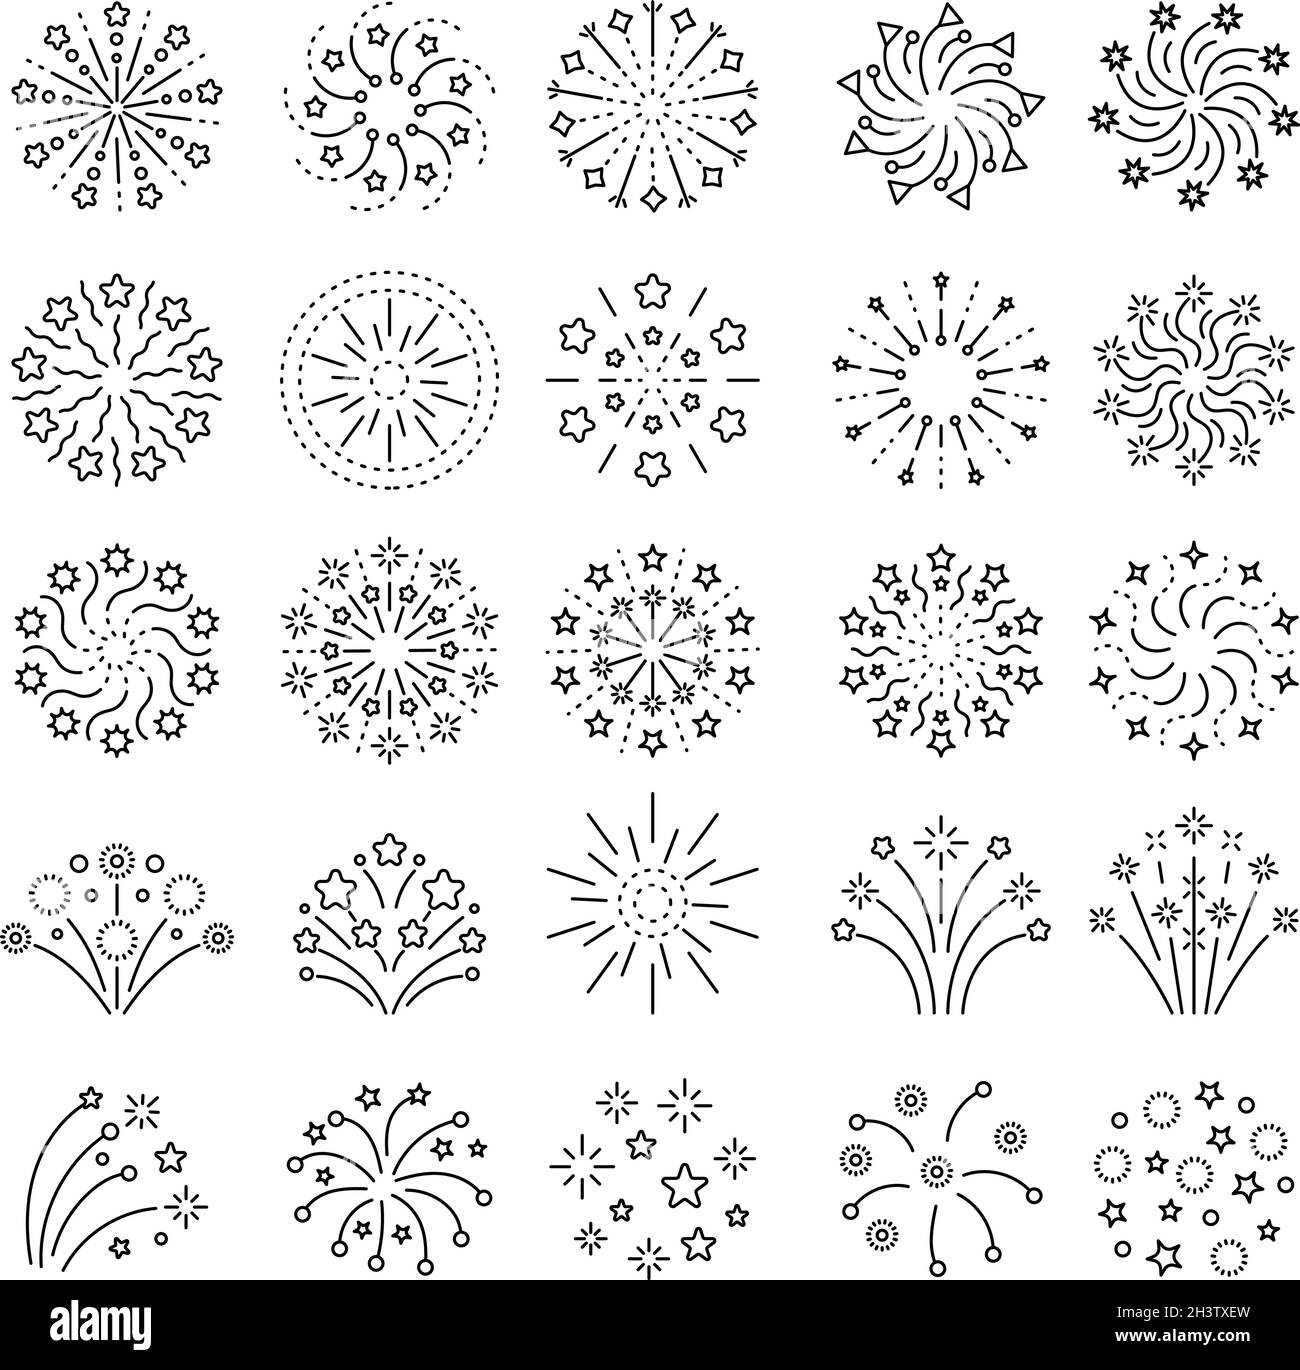 Fireworks icon. Sparks boom stars entertainment festival symbols recent vector abstract fireworks set Stock Vector